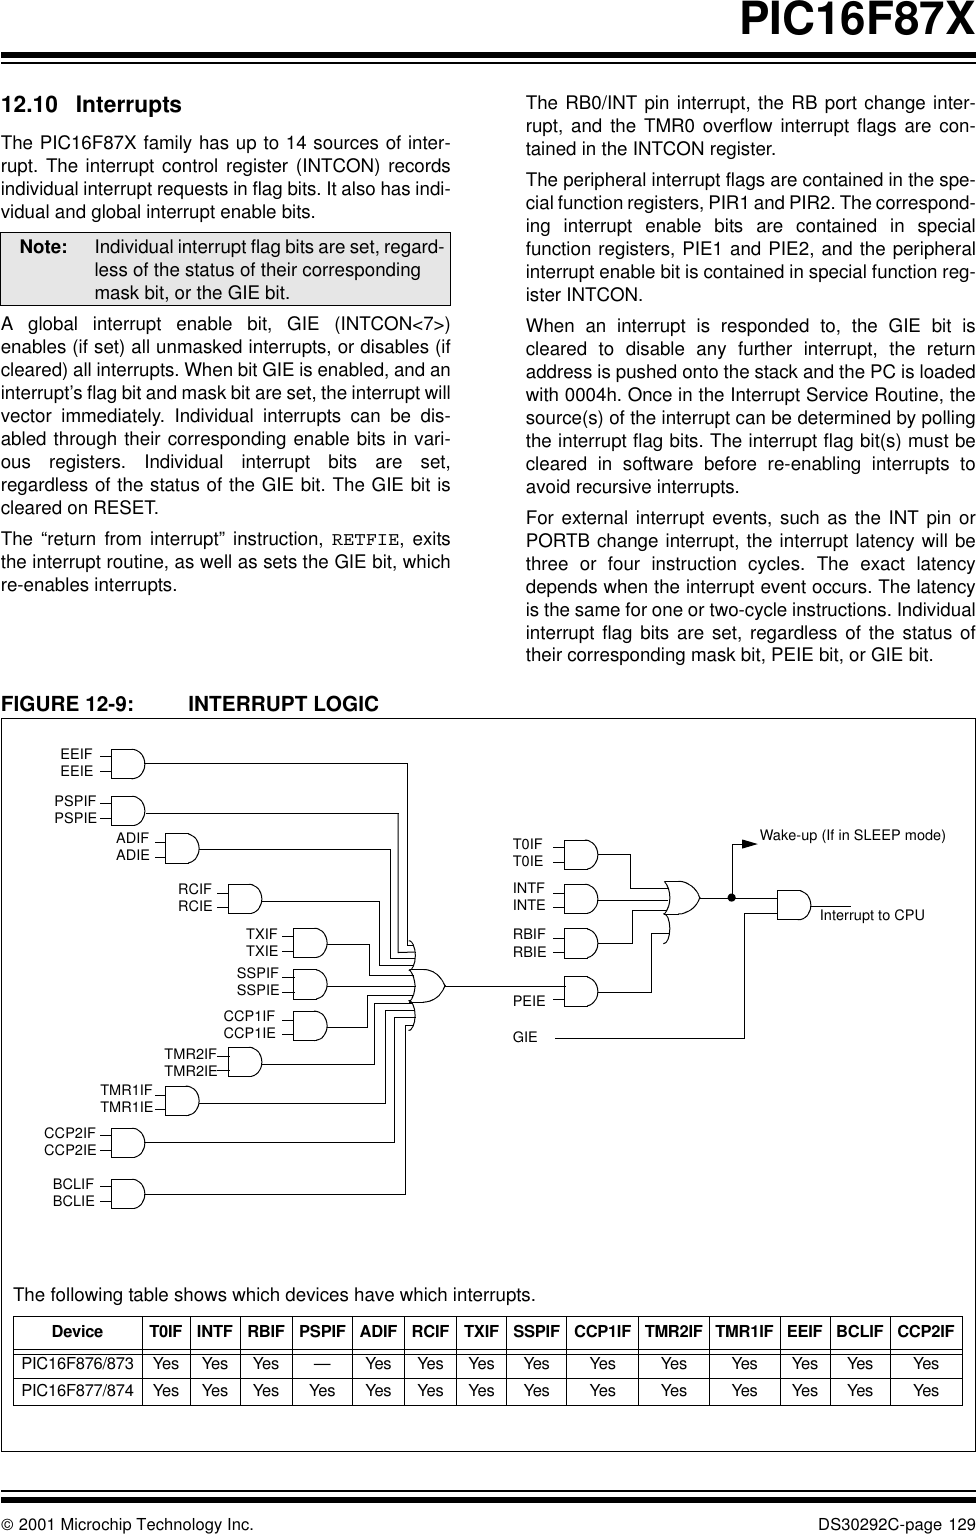  2001 Microchip Technology Inc. DS30292C-page 129PIC16F87X12.10 InterruptsThe PIC16F87X family has up to 14 sources of inter-rupt. The interrupt control register (INTCON) recordsindividual interrupt requests in flag bits. It also has indi-vidual and global interrupt enable bits. A global interrupt enable bit, GIE (INTCON&lt;7&gt;)enables (if set) all unmasked interrupts, or disables (ifcleared) all interrupts. When bit GIE is enabled, and aninterrupt’s flag bit and mask bit are set, the interrupt willvector immediately. Individual interrupts can be dis-abled through their corresponding enable bits in vari-ous registers. Individual interrupt bits are set,regardless of the status of the GIE bit. The GIE bit iscleared on RESET.The “return from interrupt” instruction, RETFIE, exitsthe interrupt routine, as well as sets the GIE bit, whichre-enables interrupts.The RB0/INT pin interrupt, the RB port change inter-rupt, and the TMR0 overflow interrupt flags are con-tained in the INTCON register.The peripheral interrupt flags are contained in the spe-cial function registers, PIR1 and PIR2. The correspond-ing interrupt enable bits are contained in specialfunction registers, PIE1 and PIE2, and the peripheralinterrupt enable bit is contained in special function reg-ister INTCON.When an interrupt is responded to, the GIE bit iscleared to disable any further interrupt, the returnaddress is pushed onto the stack and the PC is loadedwith 0004h. Once in the Interrupt Service Routine, thesource(s) of the interrupt can be determined by pollingthe interrupt flag bits. The interrupt flag bit(s) must becleared in software before re-enabling interrupts toavoid recursive interrupts. For external interrupt events, such as the INT pin orPORTB change interrupt, the interrupt latency will bethree or four instruction cycles. The exact latencydepends when the interrupt event occurs. The latencyis the same for one or two-cycle instructions. Individualinterrupt flag bits are set, regardless of the status oftheir corresponding mask bit, PEIE bit, or GIE bit. FIGURE 12-9: INTERRUPT LOGICNote: Individual interrupt flag bits are set, regard-less of the status of their corresponding mask bit, or the GIE bit. PSPIFPSPIEADIFADIERCIFRCIETXIFTXIESSPIFSSPIECCP1IFCCP1IETMR2IFTMR2IETMR1IFTMR1IET0IFT0IEINTFINTERBIFRBIEGIEPEIEWake-up (If in SLEEP mode)Interrupt to CPUCCP2IECCP2IFThe following table shows which devices have which interrupts.Device T0IF INTF RBIF PSPIF ADIF RCIF TXIF SSPIF CCP1IF TMR2IF TMR1IF EEIF BCLIF CCP2IFPIC16F876/873 Yes Yes Yes —Yes Yes Yes Yes Yes Yes Yes Yes Yes YesPIC16F877/874 Yes Yes Yes Yes Yes Yes Yes Yes Yes Yes Yes Yes Yes YesBCLIEBCLIFEEIFEEIE